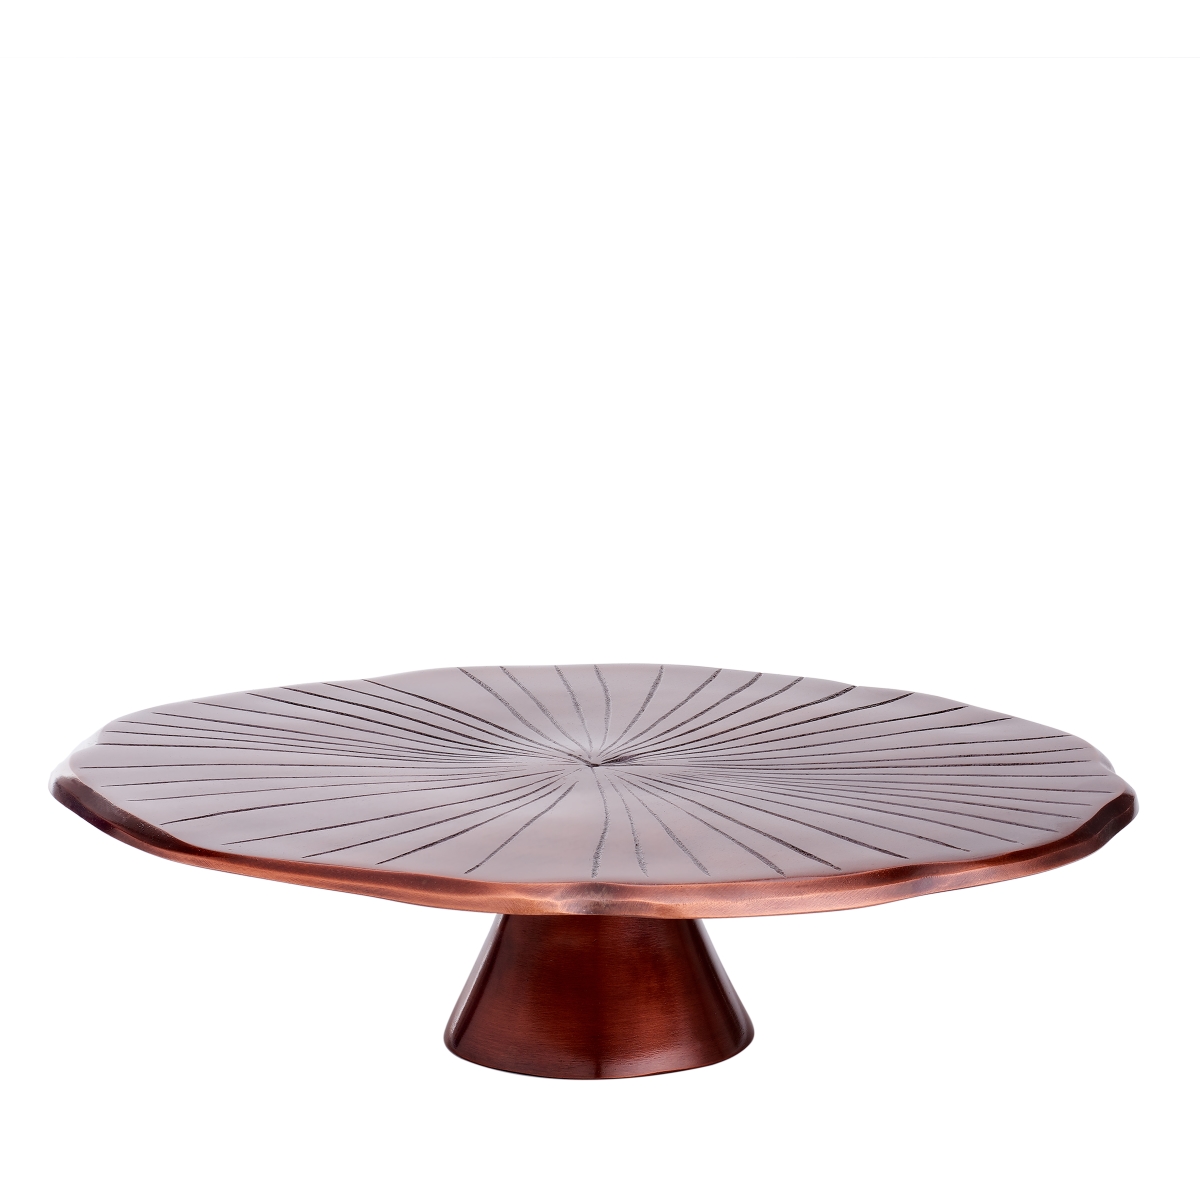 3442ac 12.5 X 3.87 In. Lily Pad Cake Stand, Antique Copper